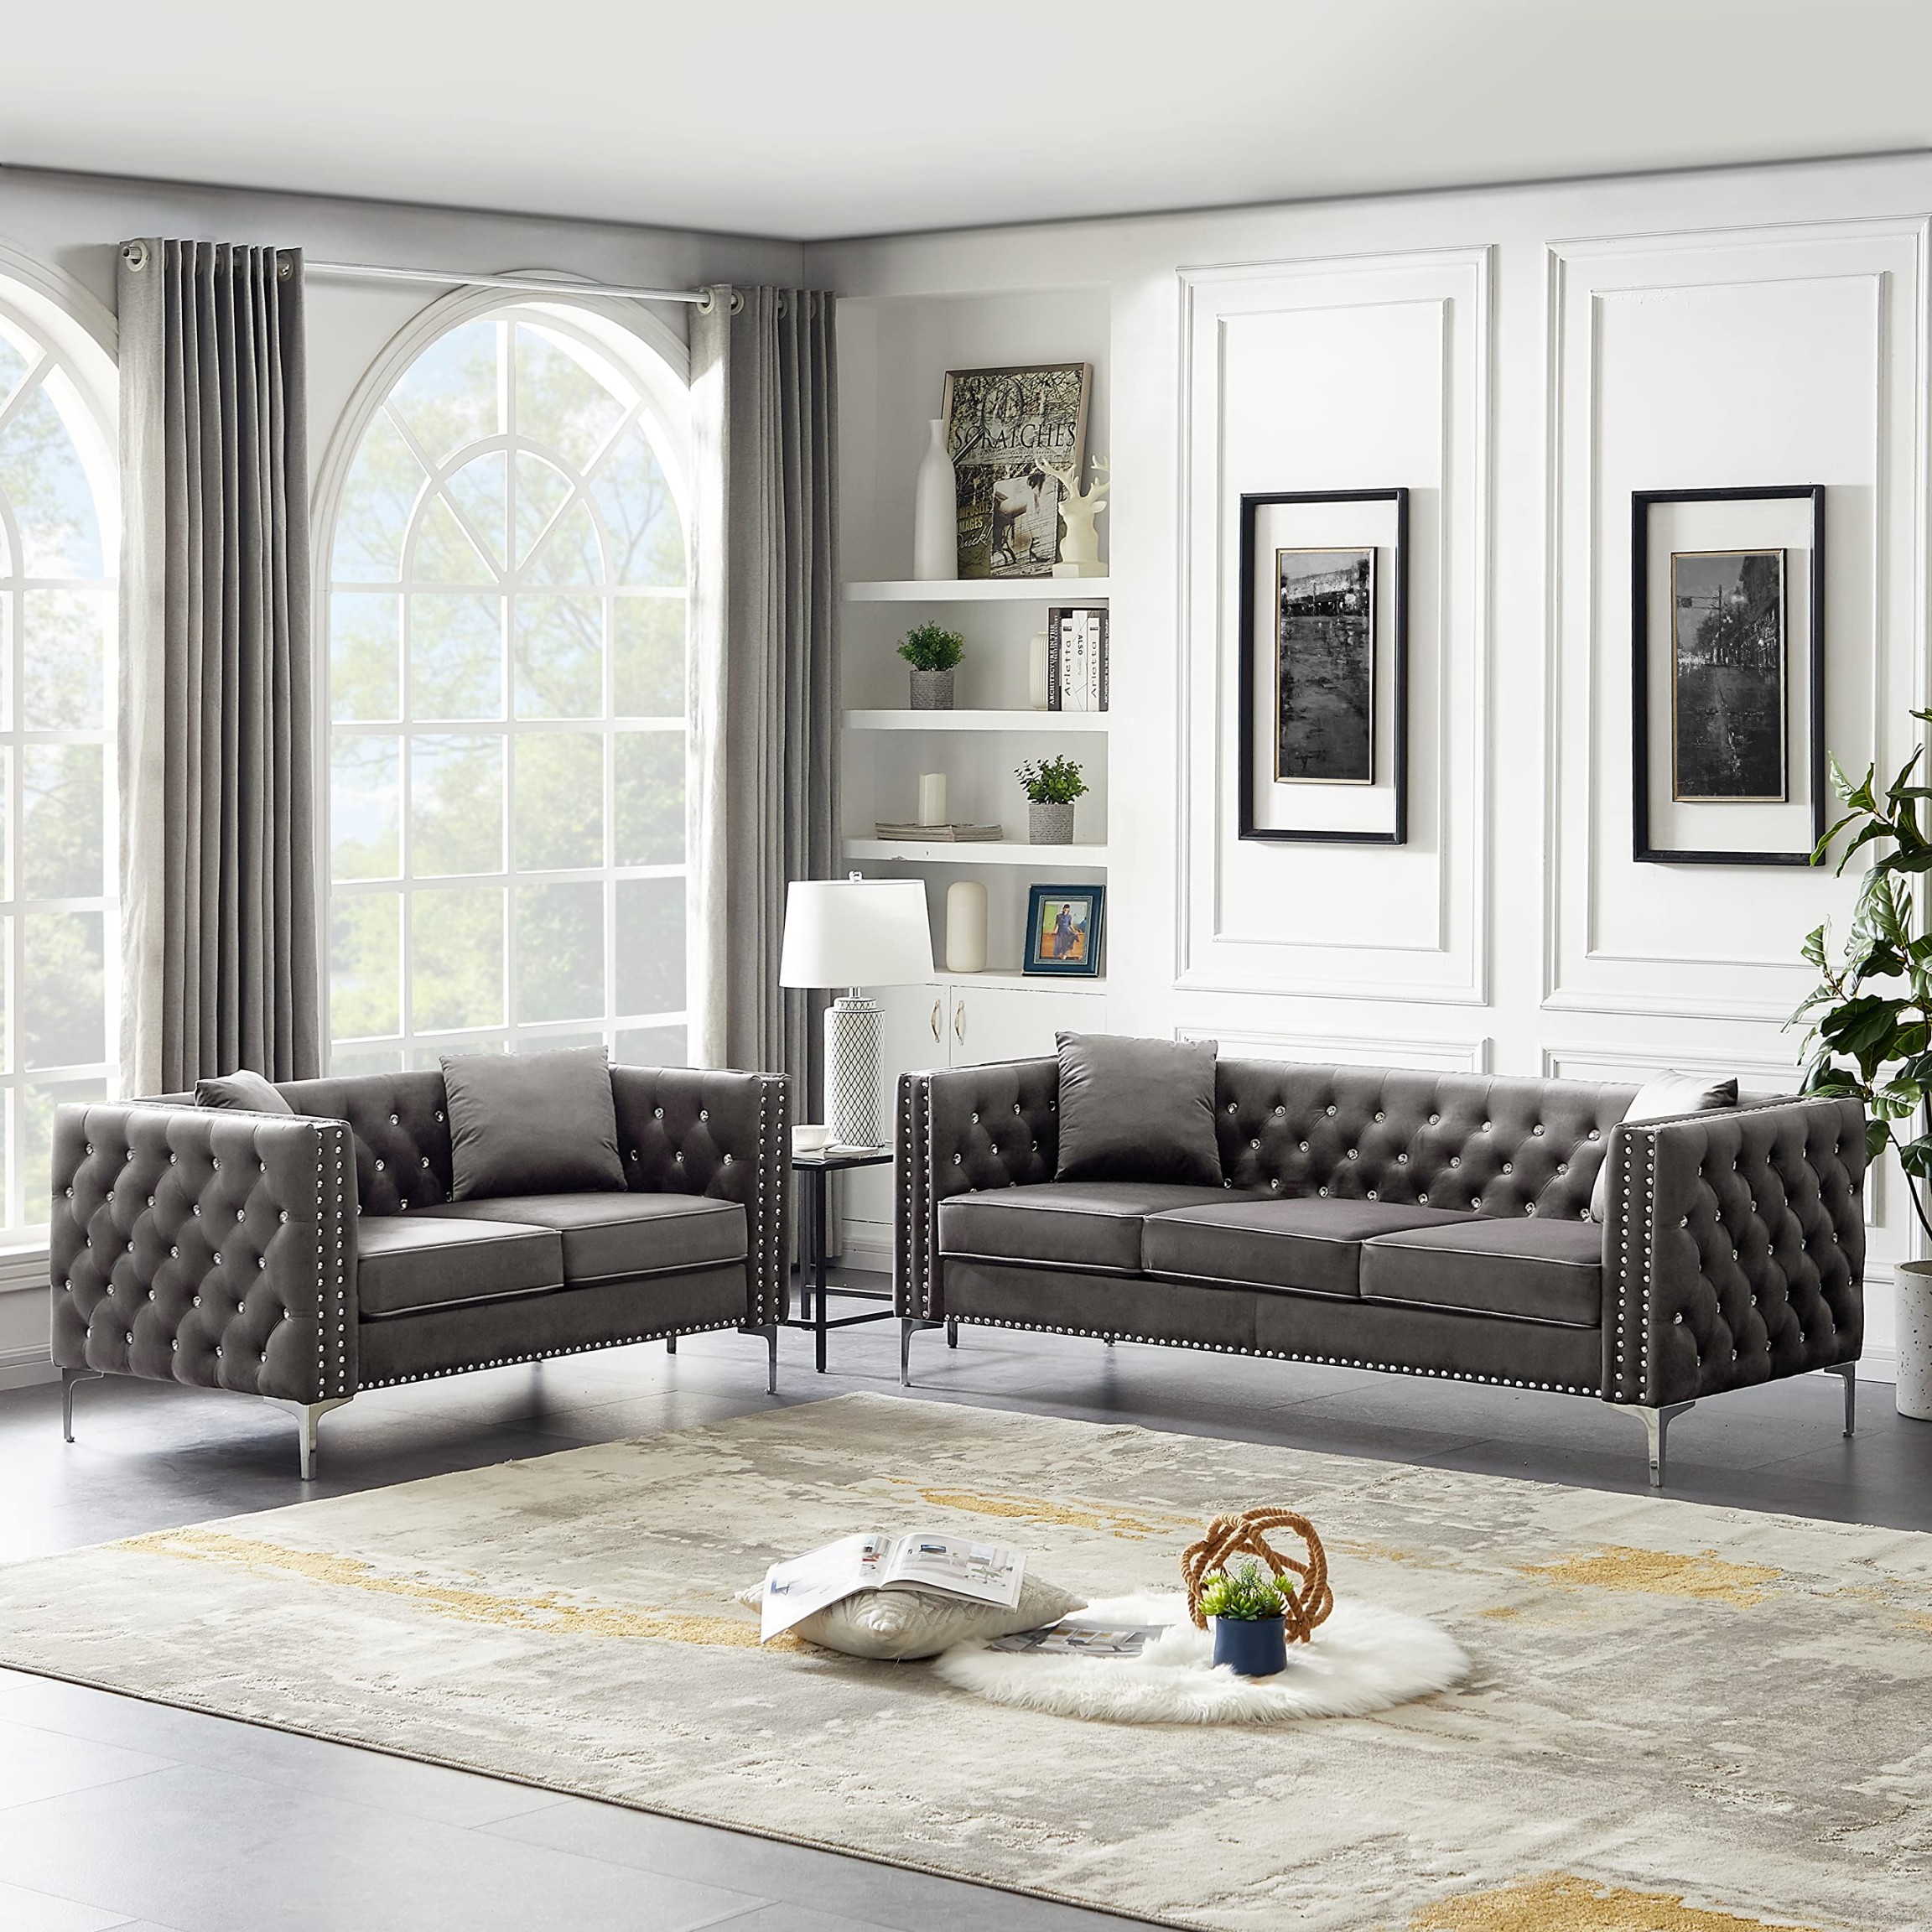 Harper & Bright Designs -Piece Grey Velvet Upholstered Living Room  Furniture Set, Including -Seater Sofa and Loveseat with Jeweled Buttons,  Square